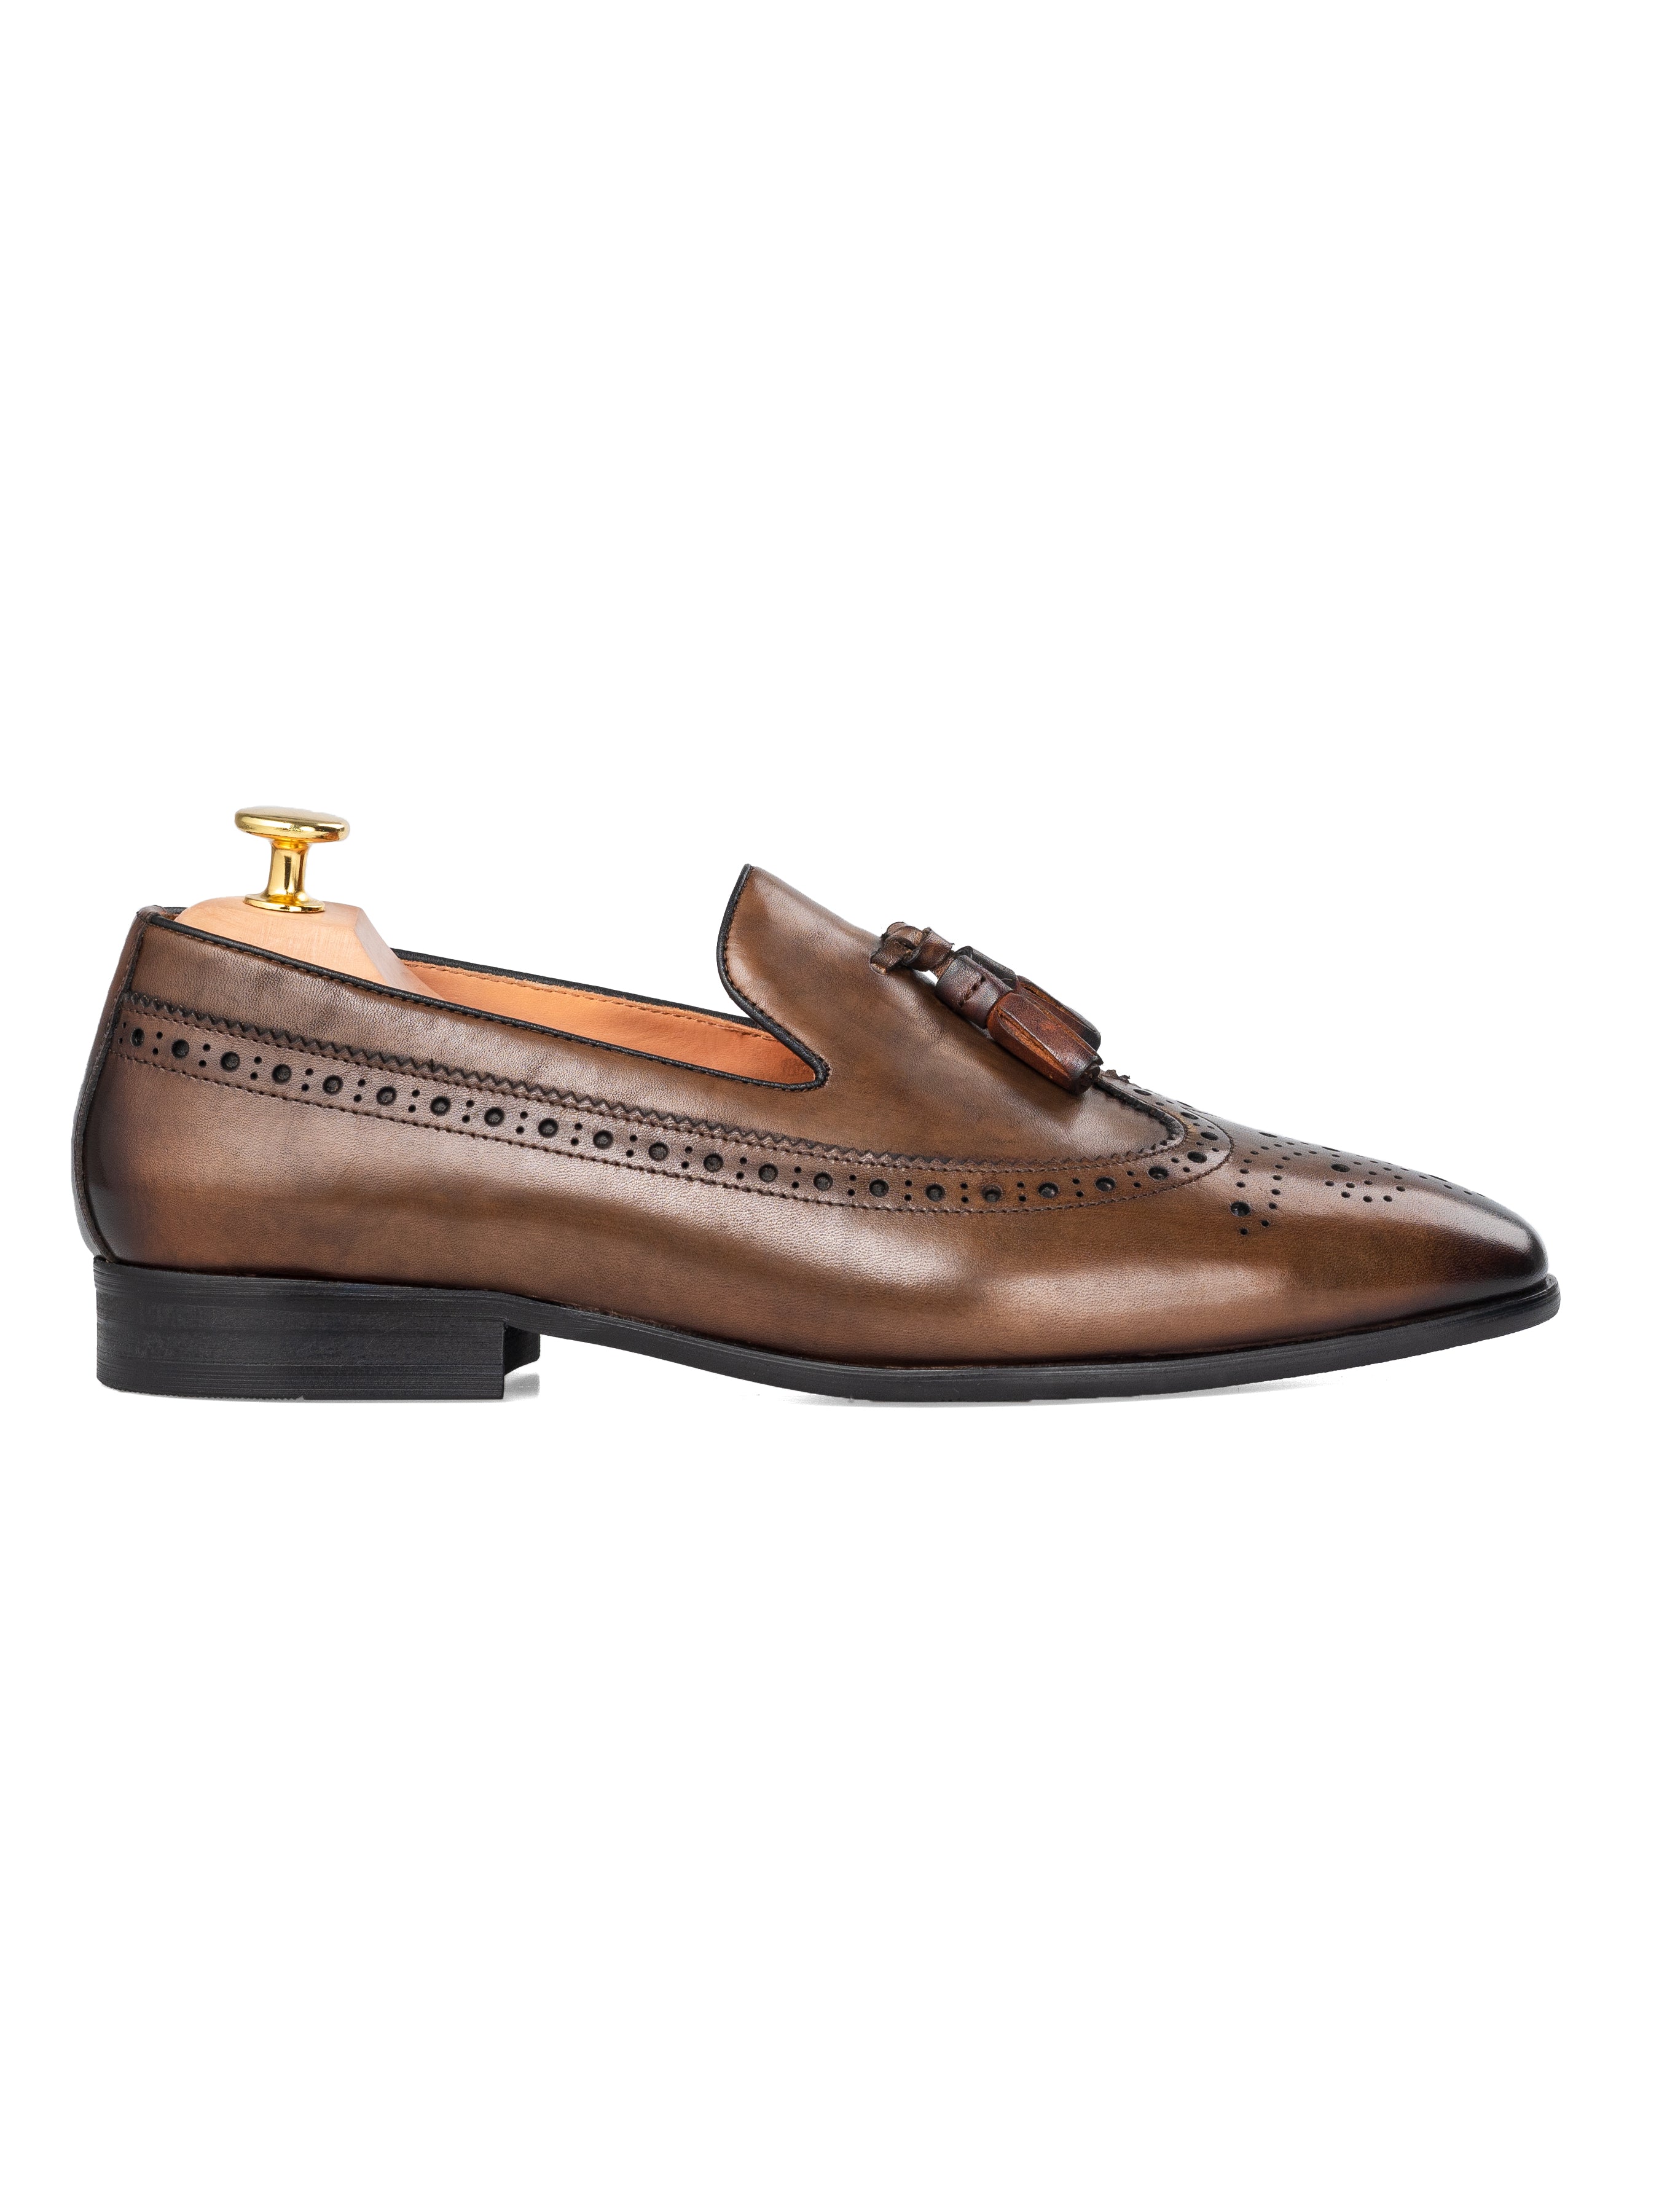 Loafer Slipper Longwing Brogue - Khakis with Tassel (Hand Painted Patina)